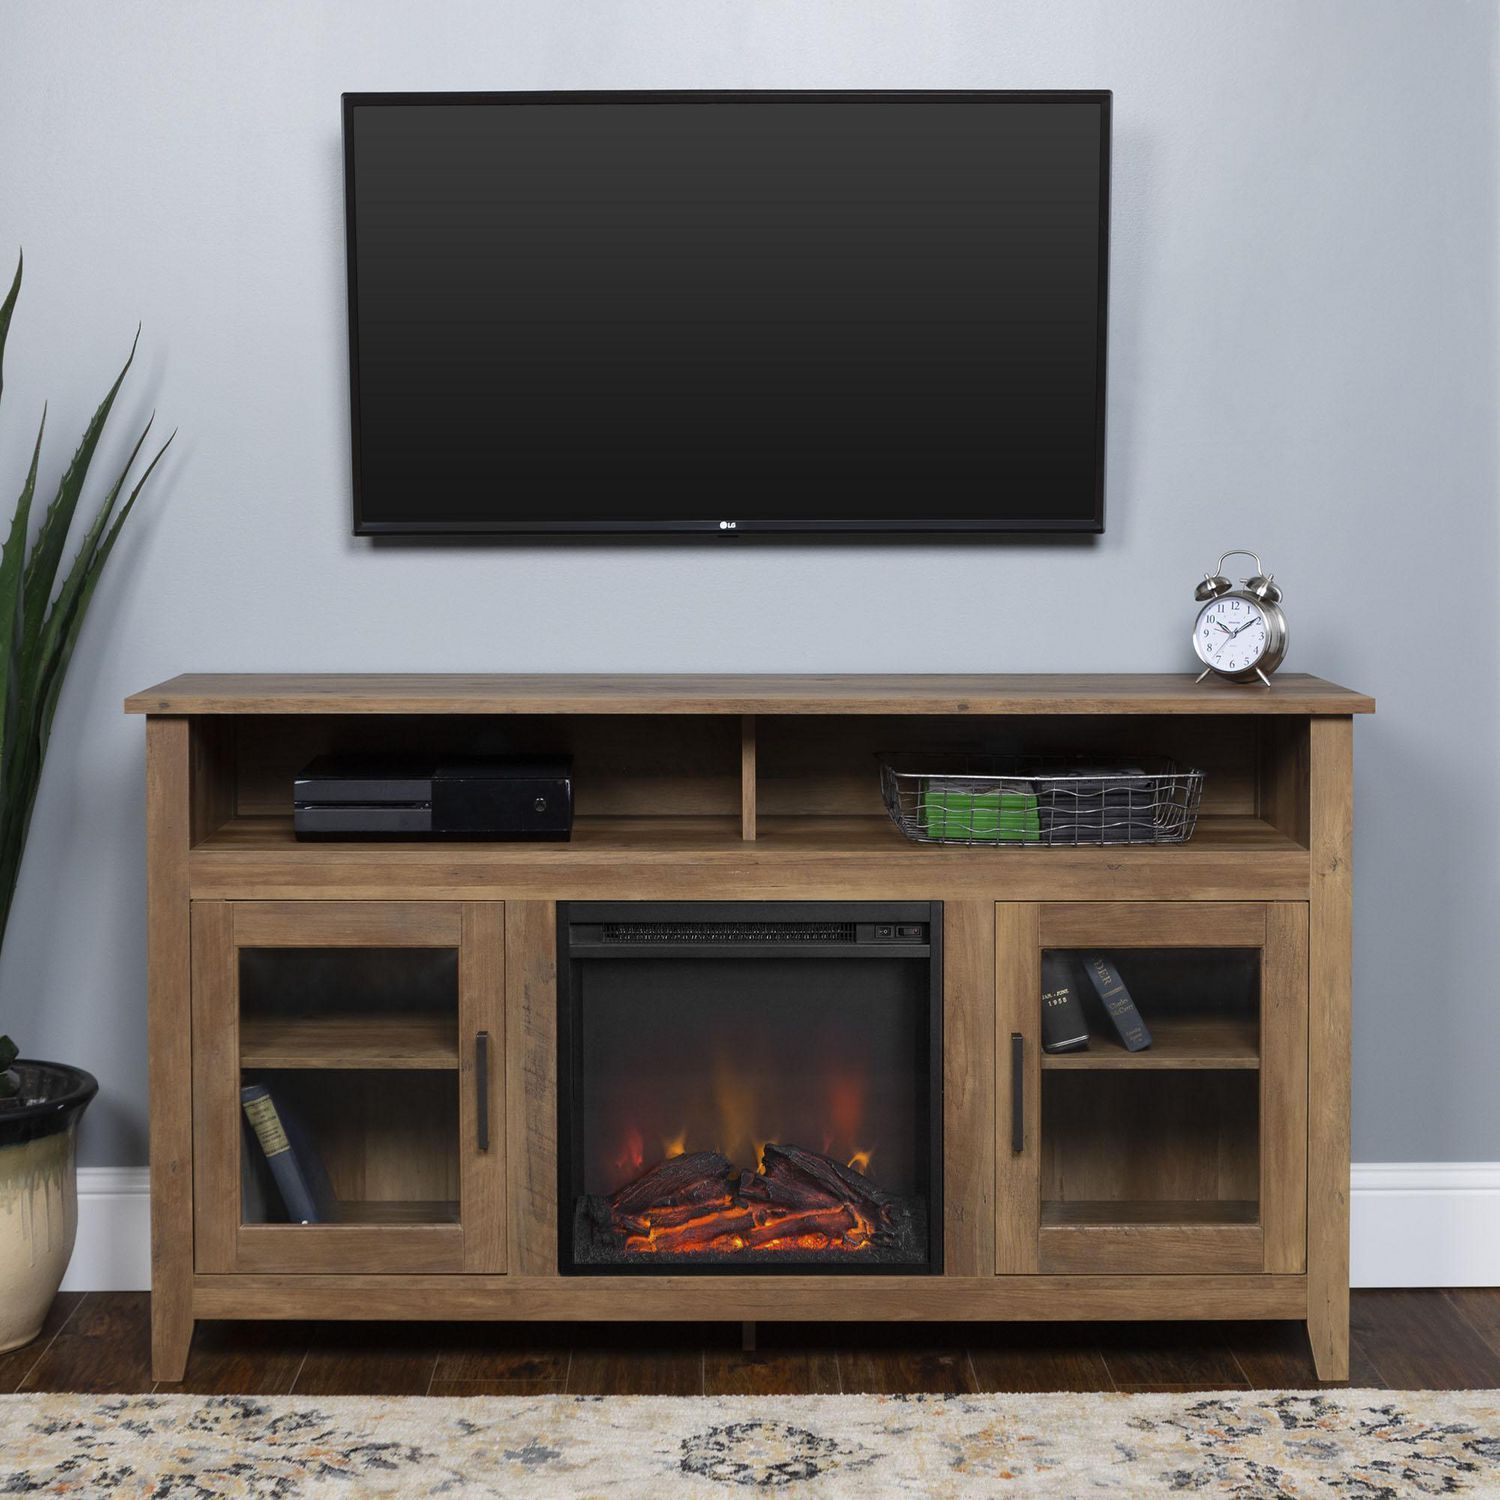 58" Wood Highboy Fireplace Tv Stand – Rustic Oak | Walmart Canada Regarding Wood Highboy Fireplace Tv Stands (View 9 of 20)